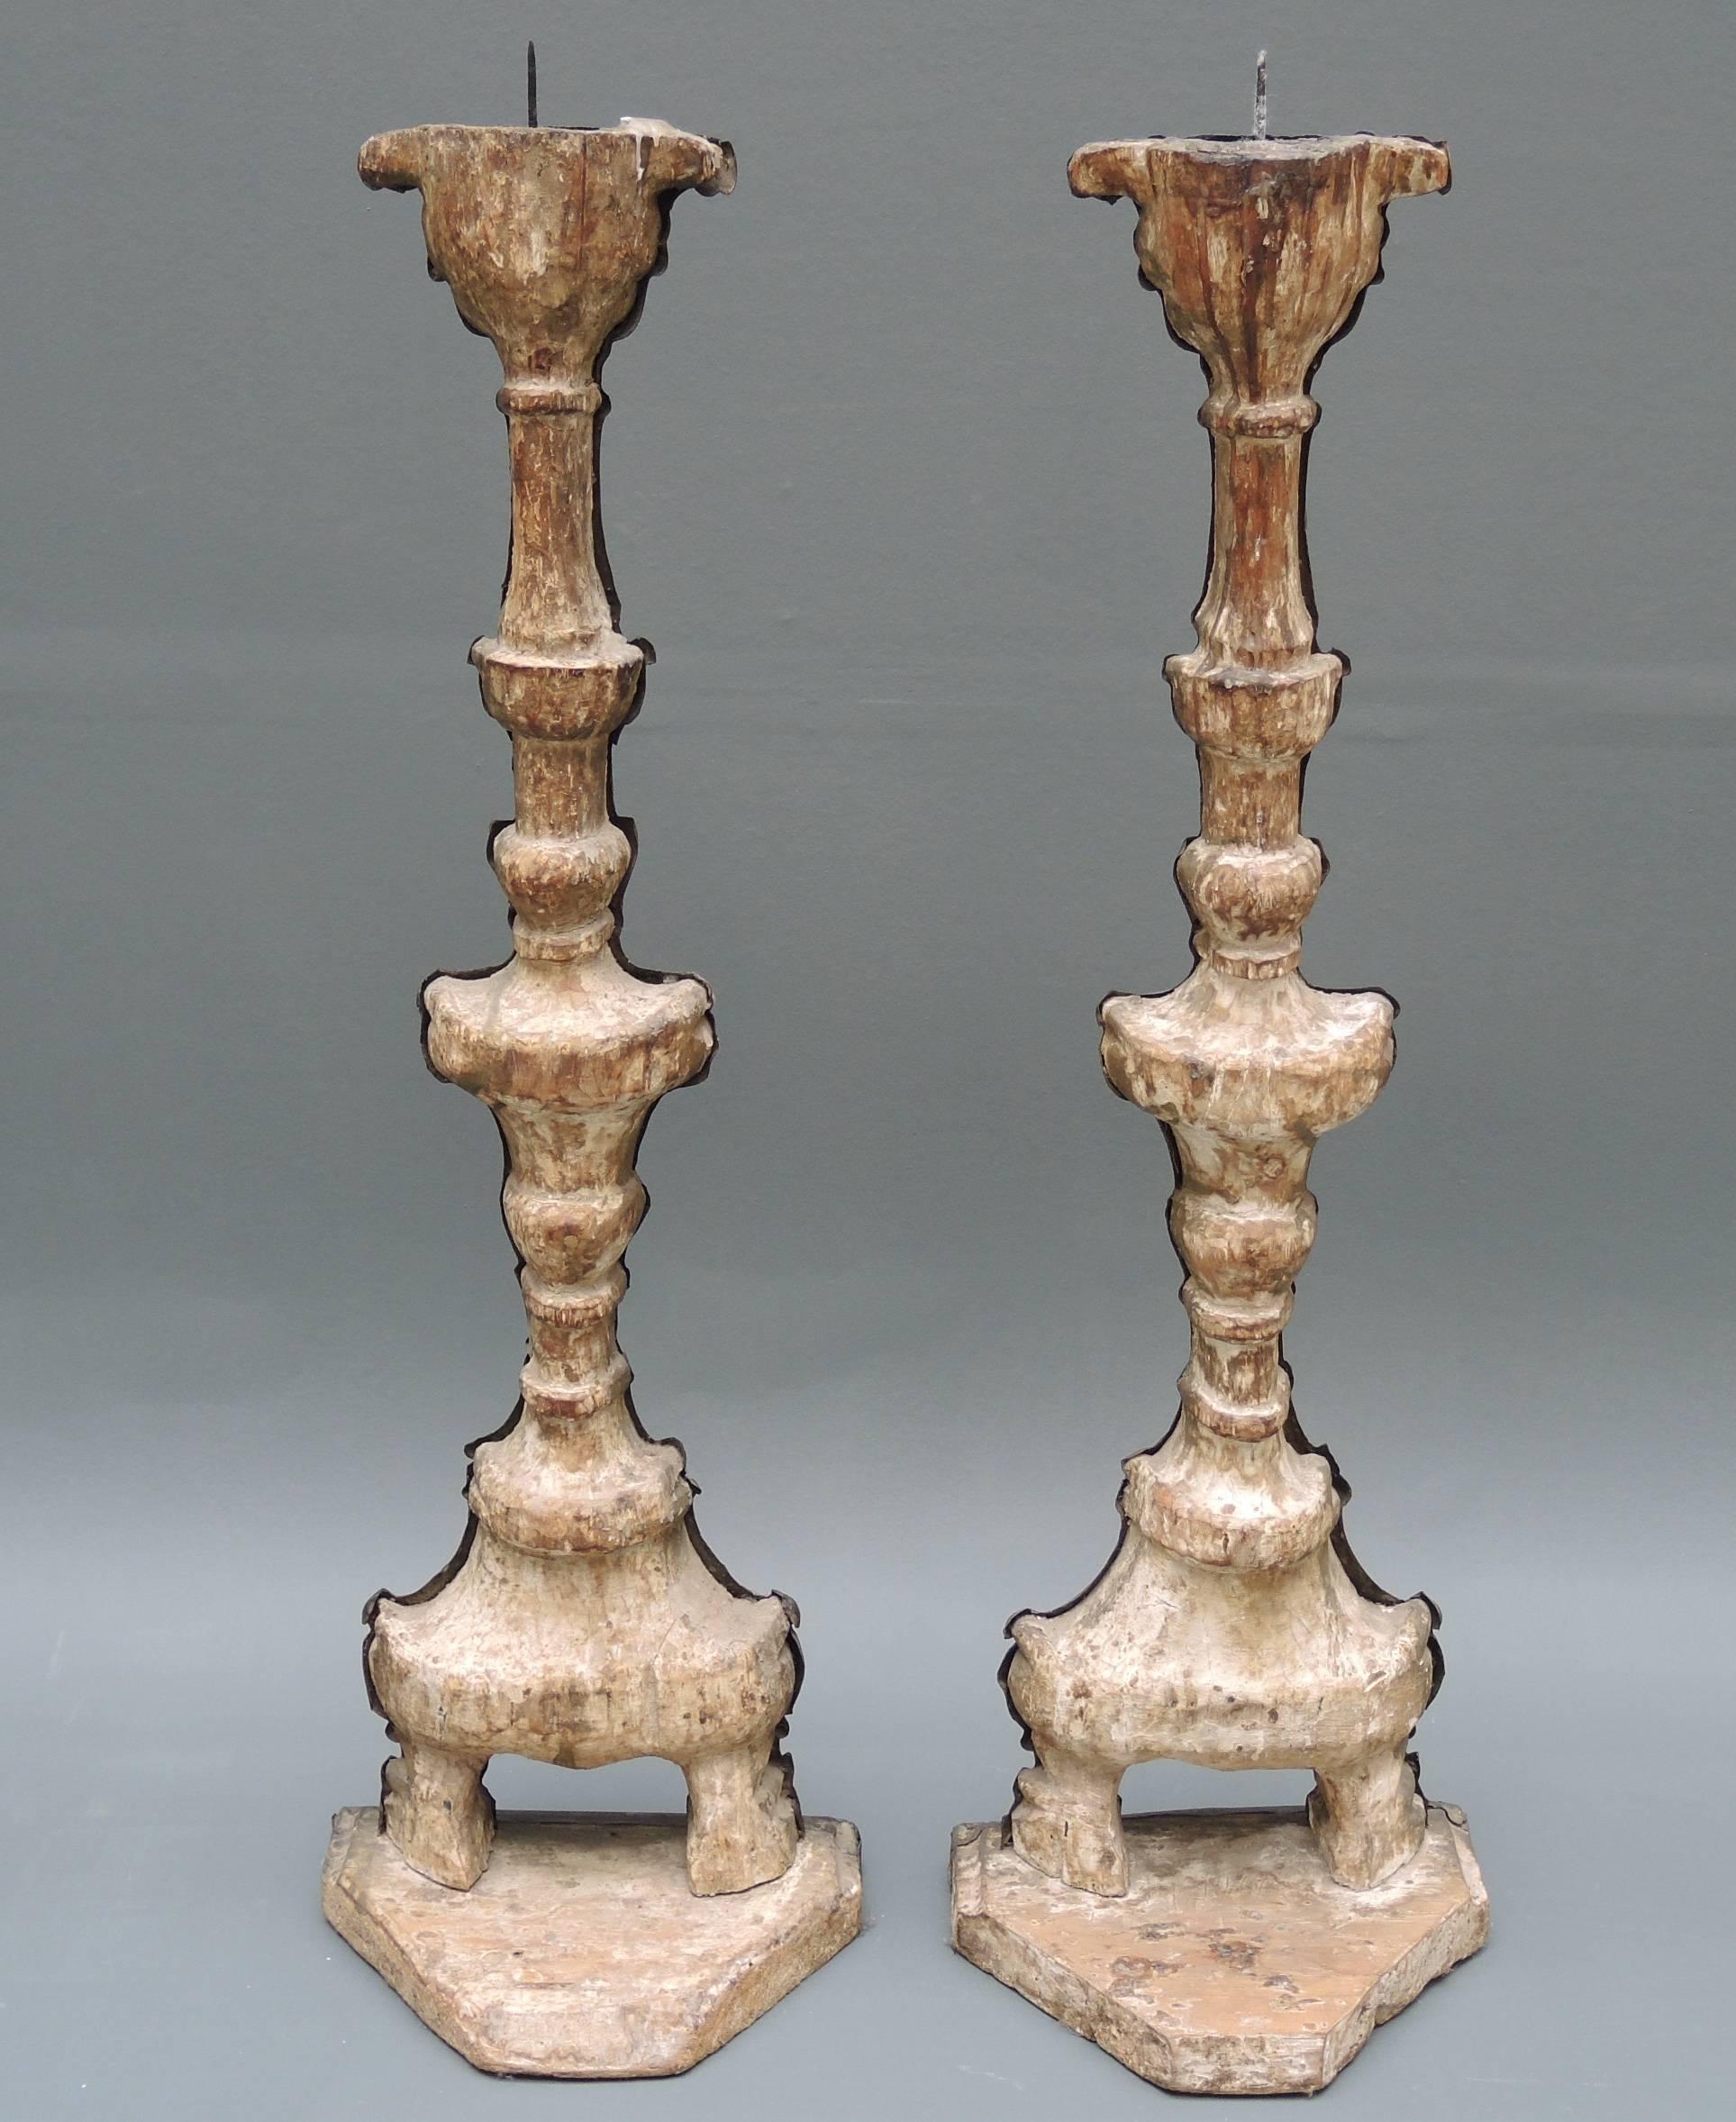 A pair of 18th century Italian altar candlesticks with repoussé brass work over wood. They can be made into table lamps by request at no extra charge.
Repoussé is a metalworking technique in which a malleable metal is ornamented or shaped by